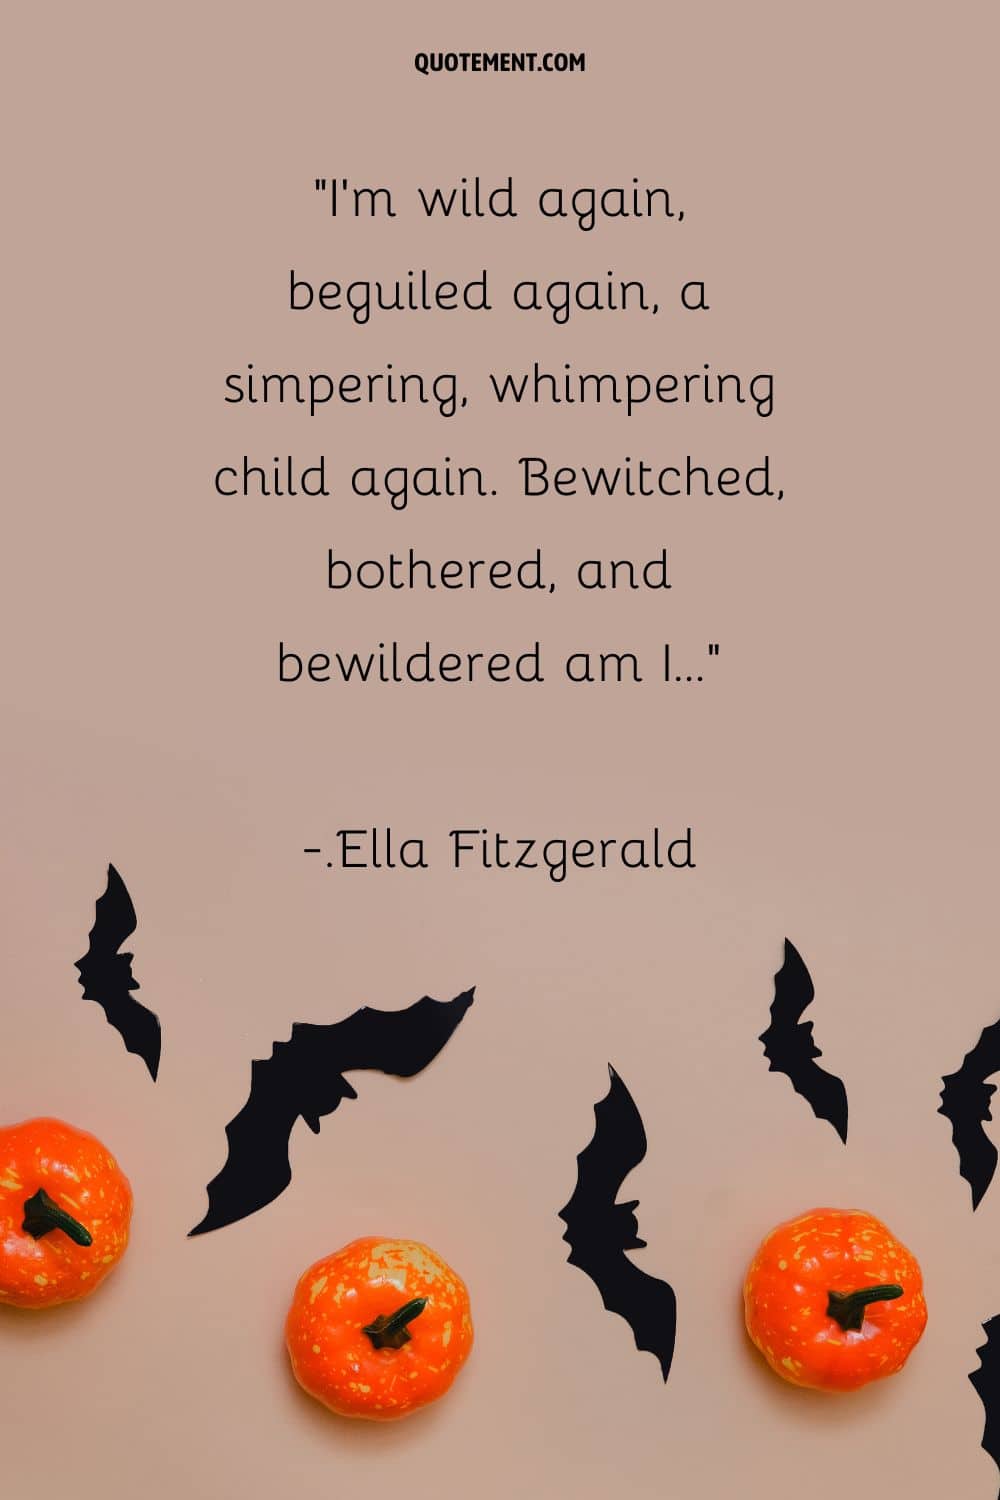 I'm wild again, beguiled again, a simpering, whimpering child again. Bewitched, bothered, and bewildered am I...